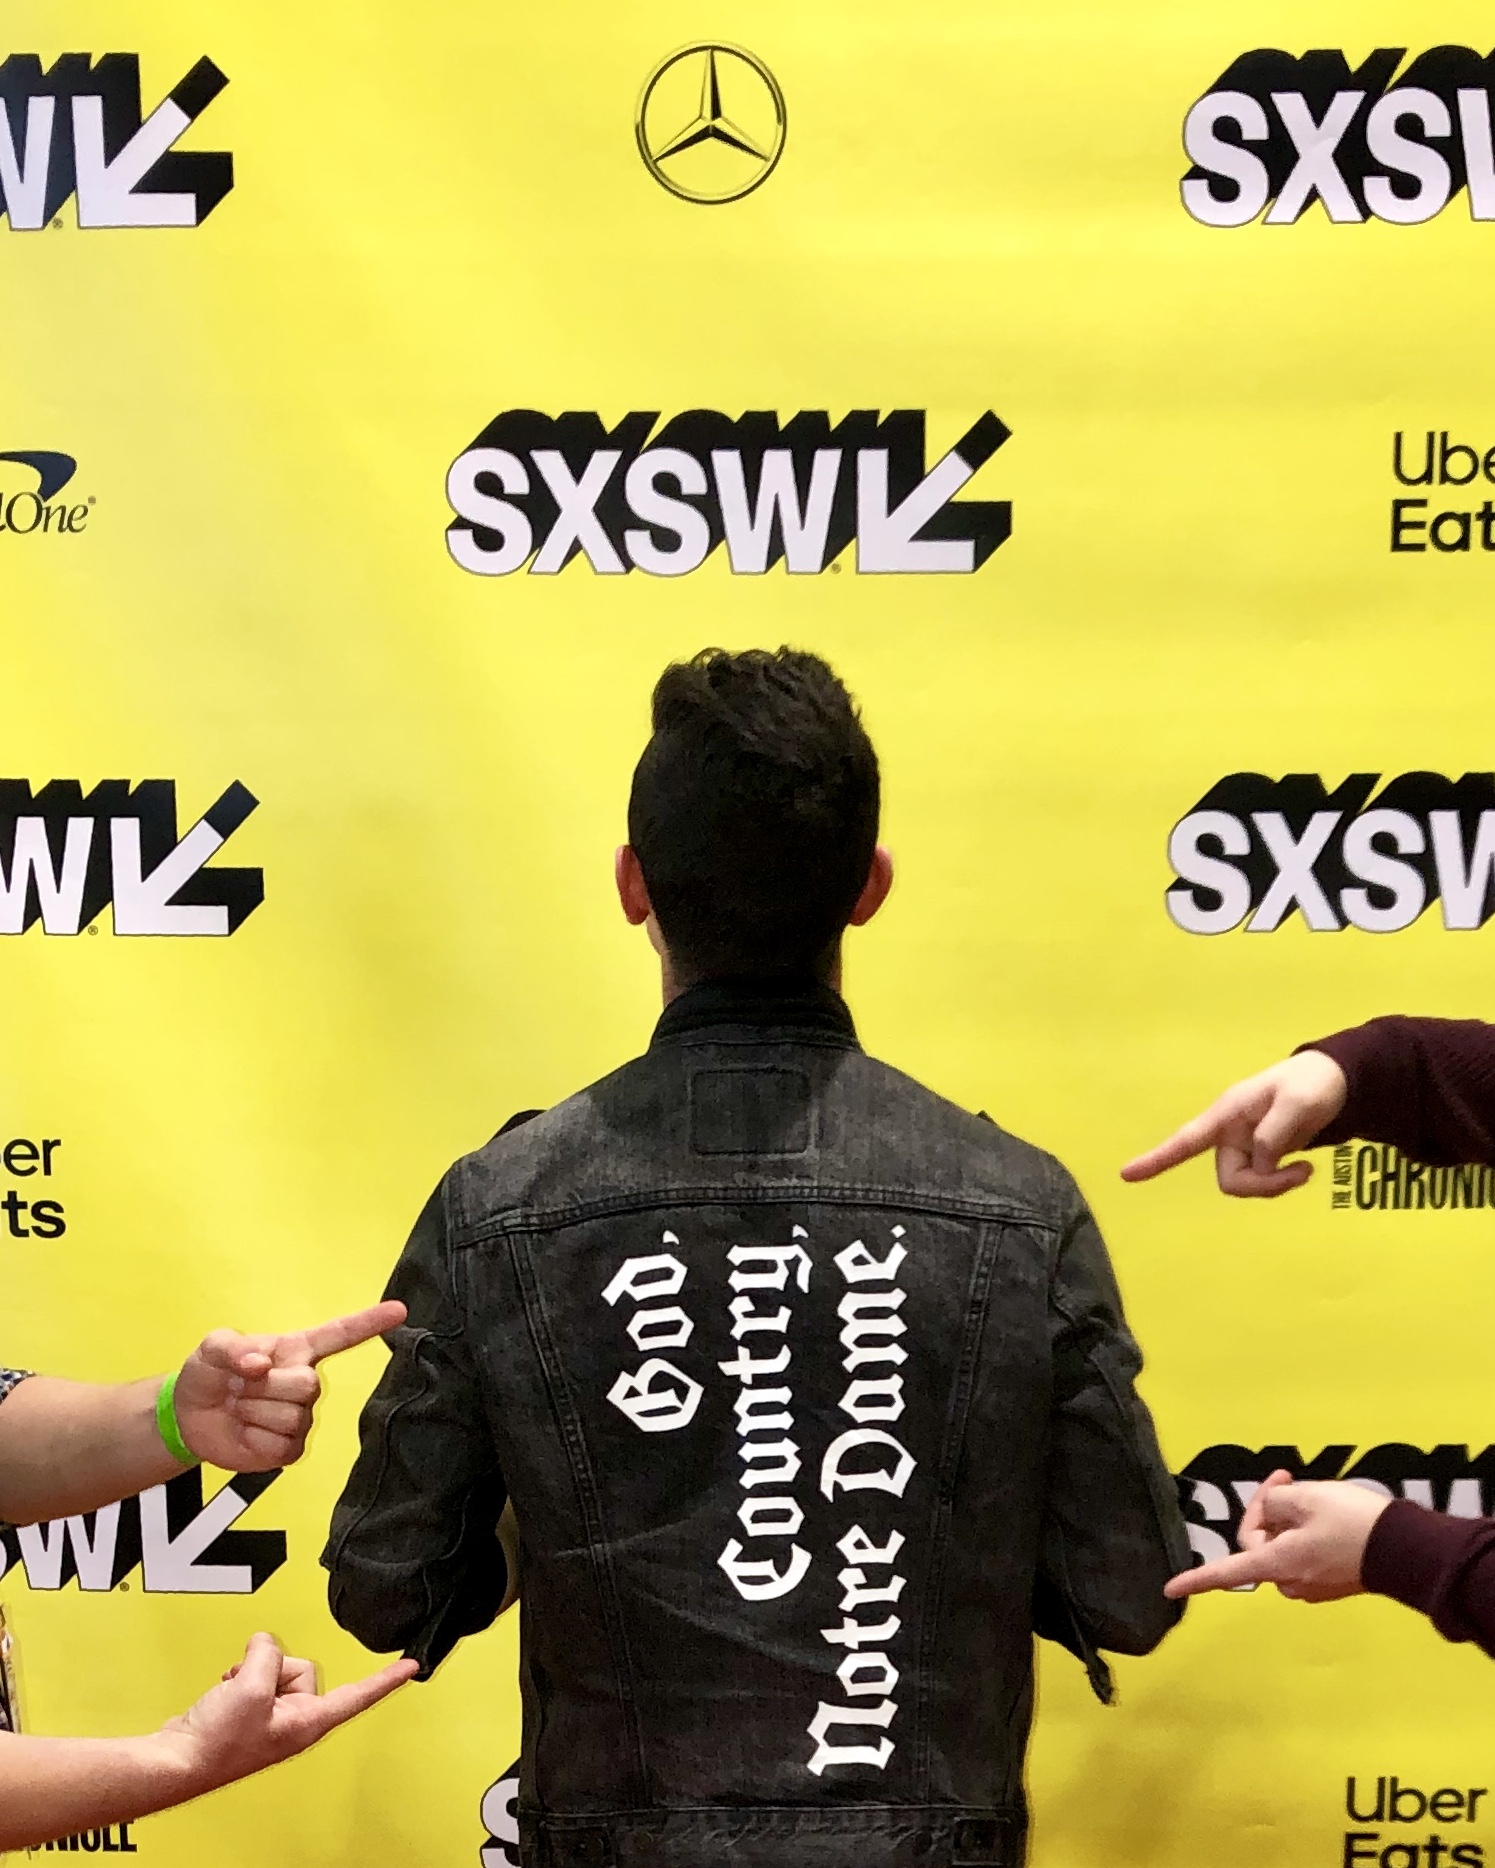 fingers point to the back of a jacket on a man reading: God. Country. Notre Dame. He stands in front of a SXSW backdrop